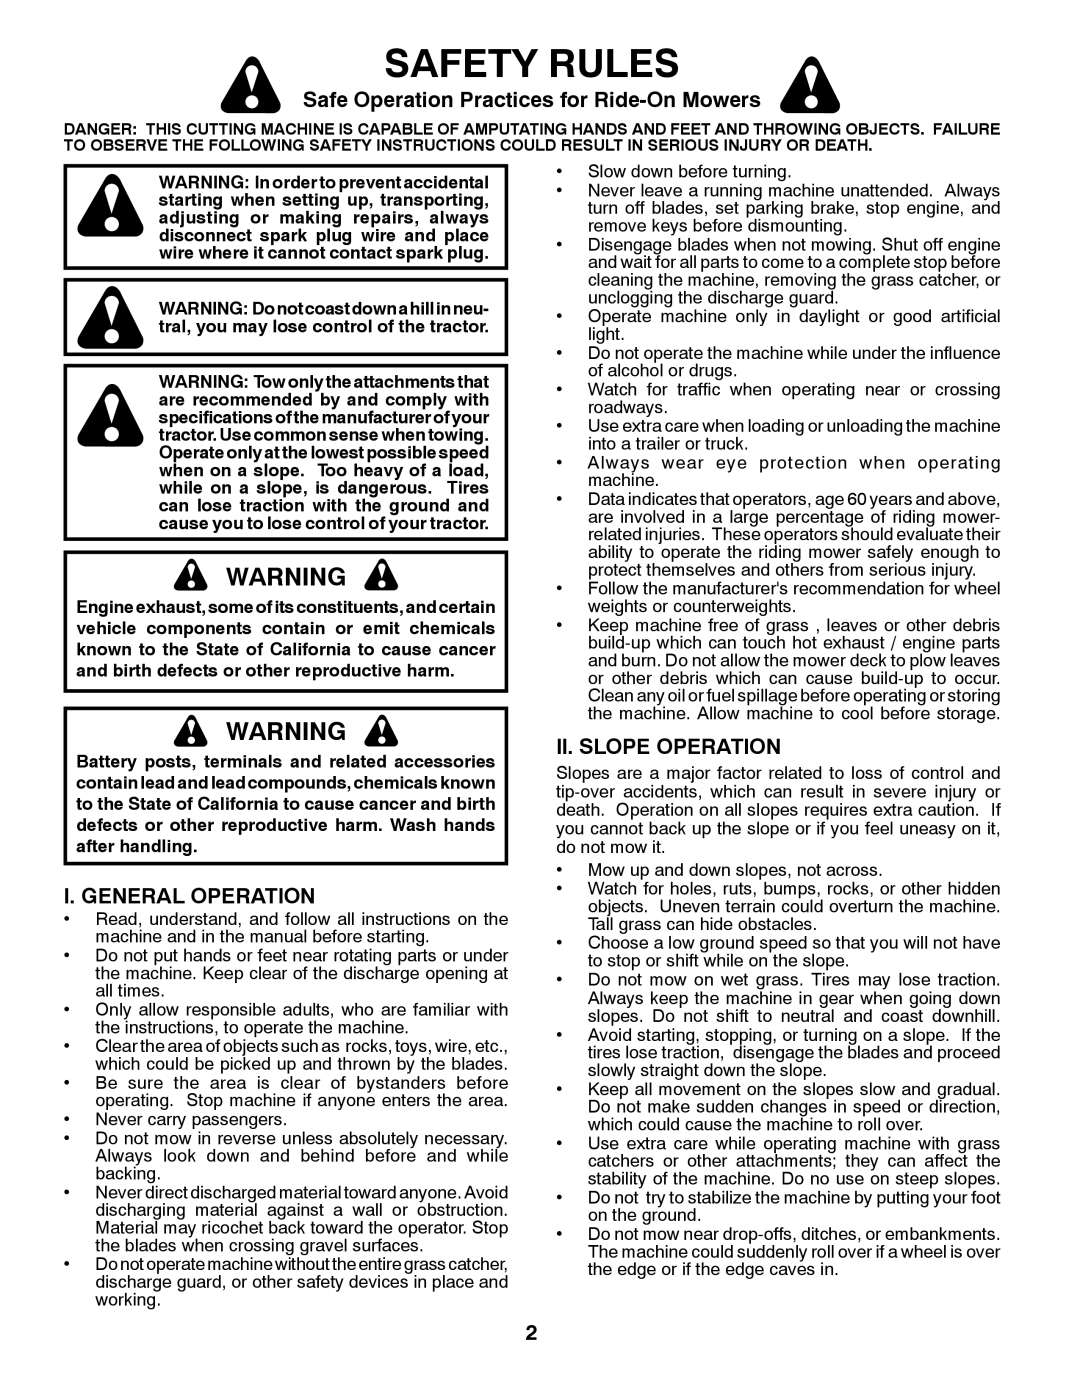 Husqvarna 96043006800 Safety Rules, Safe Operation Practices for Ride-OnMowers, I. General Operation, Ii. Slope Operation 